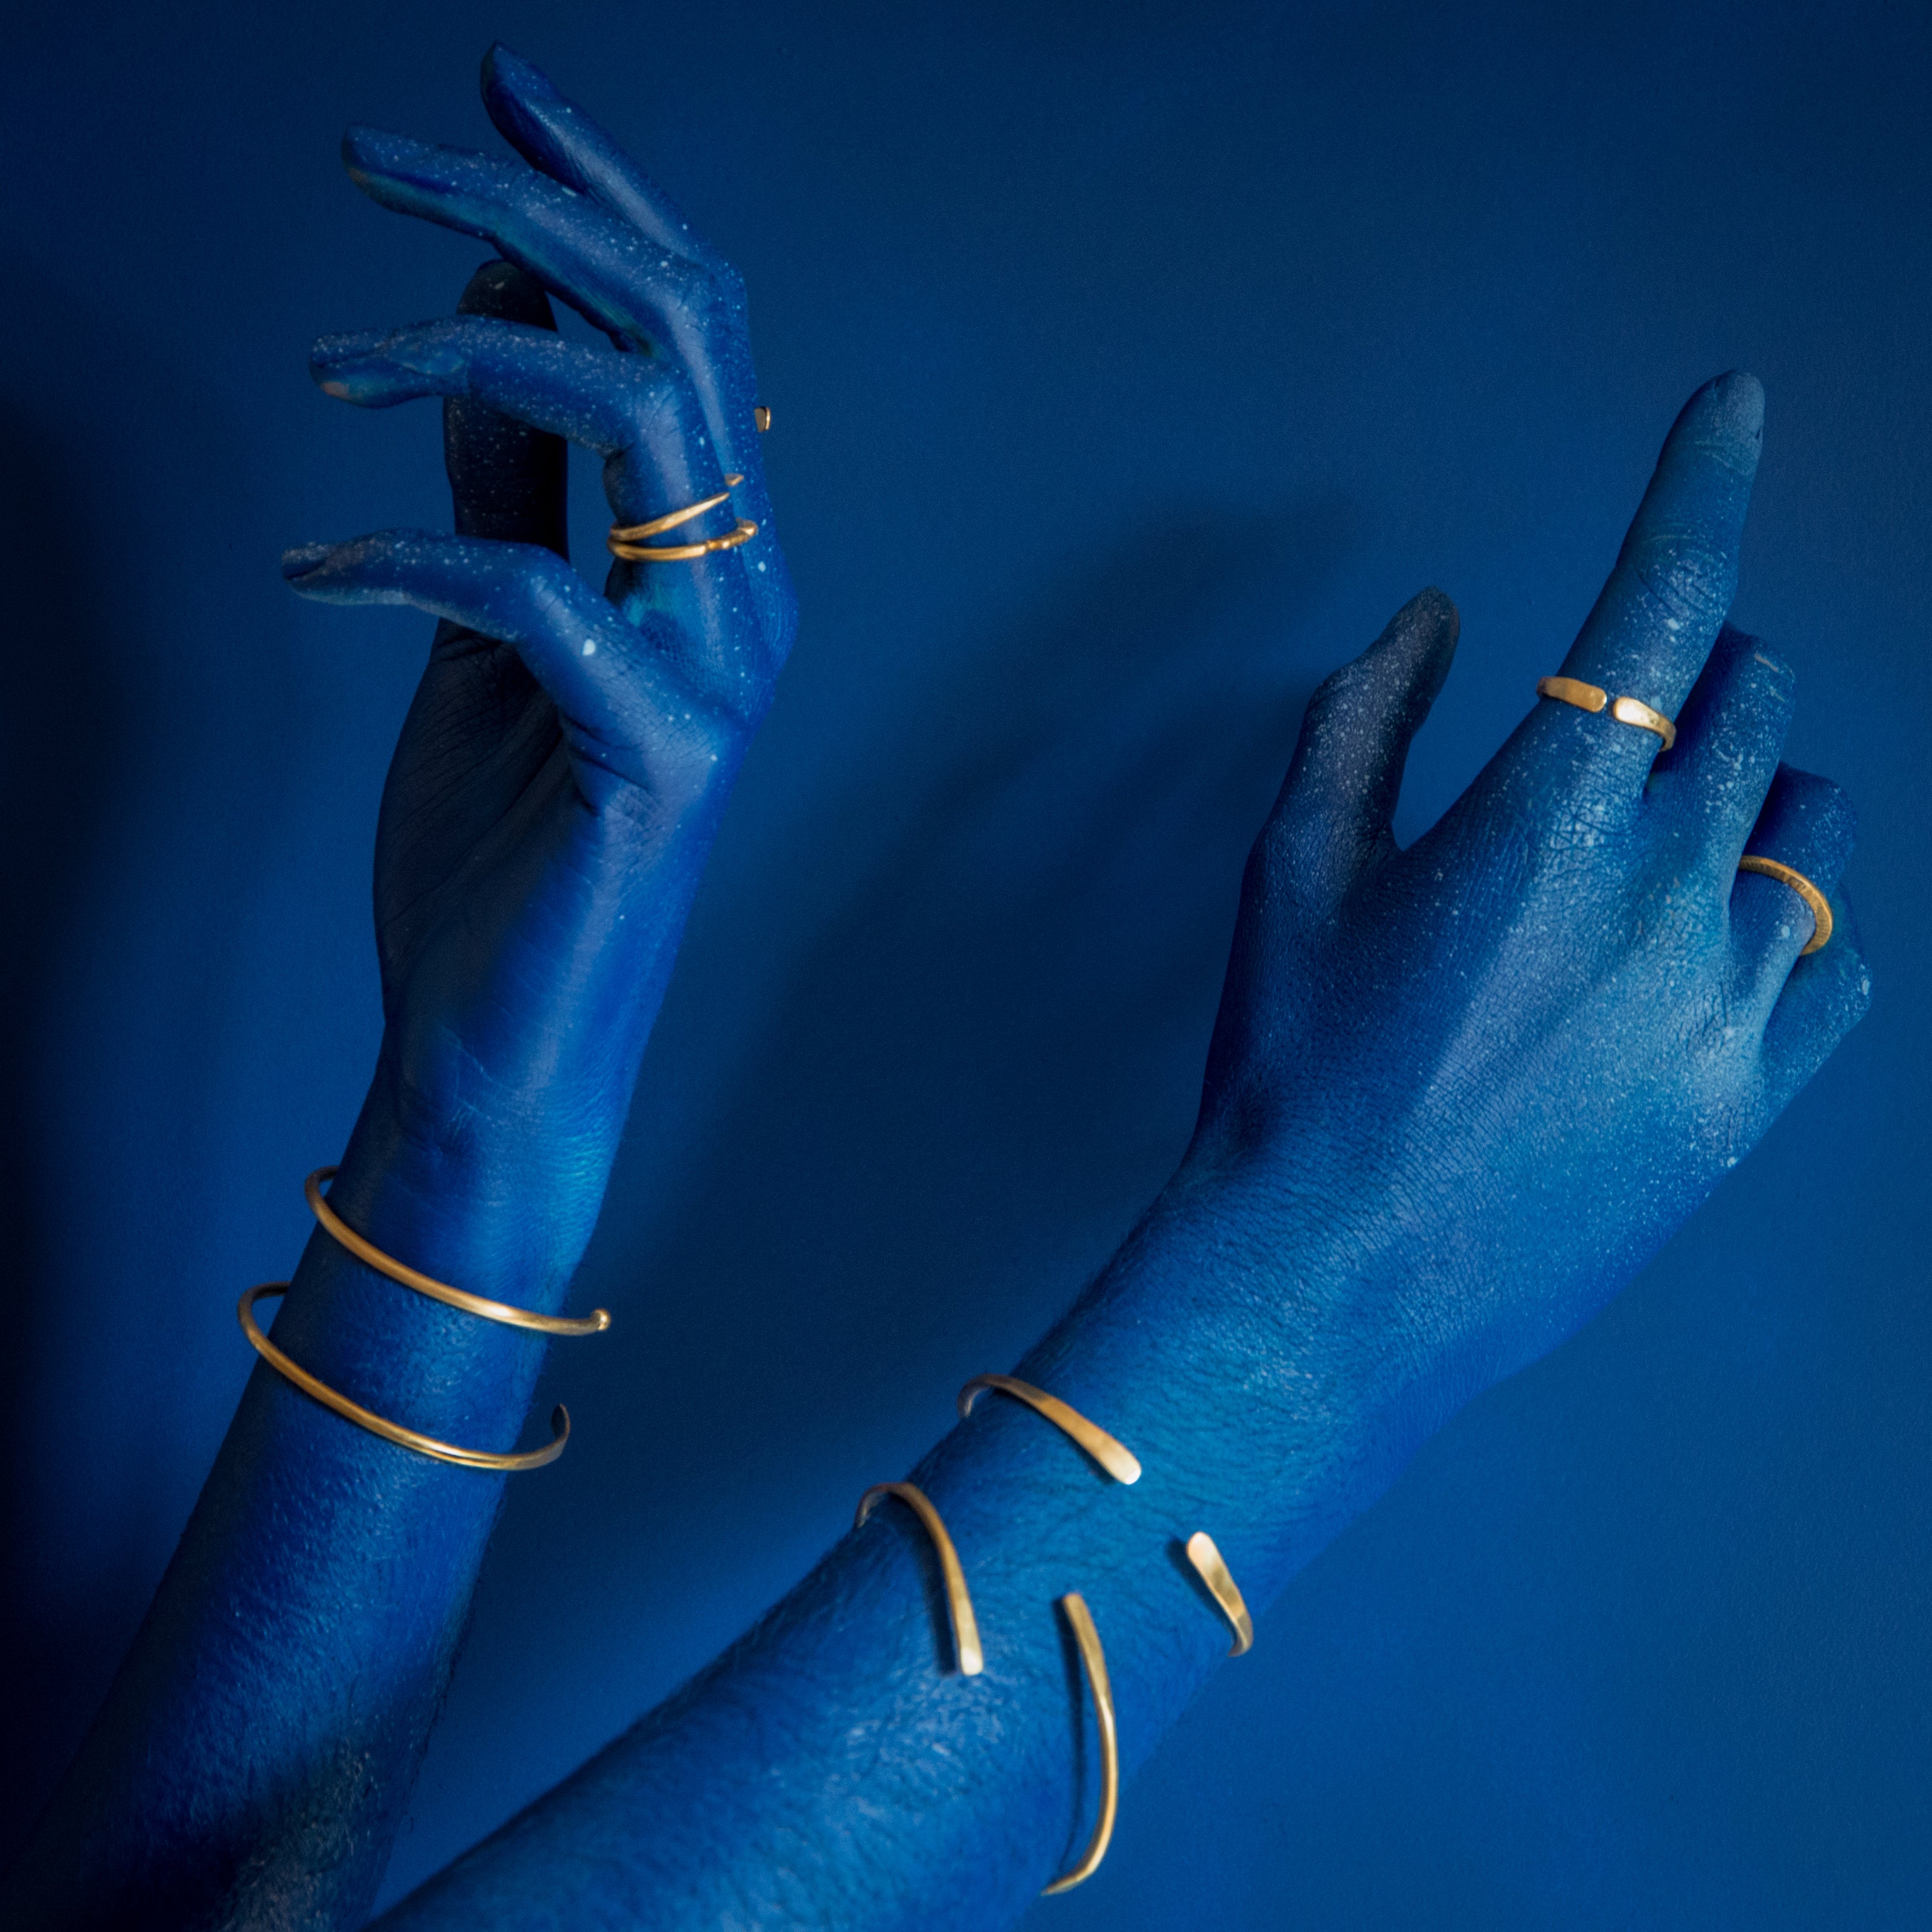 model with blue hand on blue background wearing brass rings and cuffs